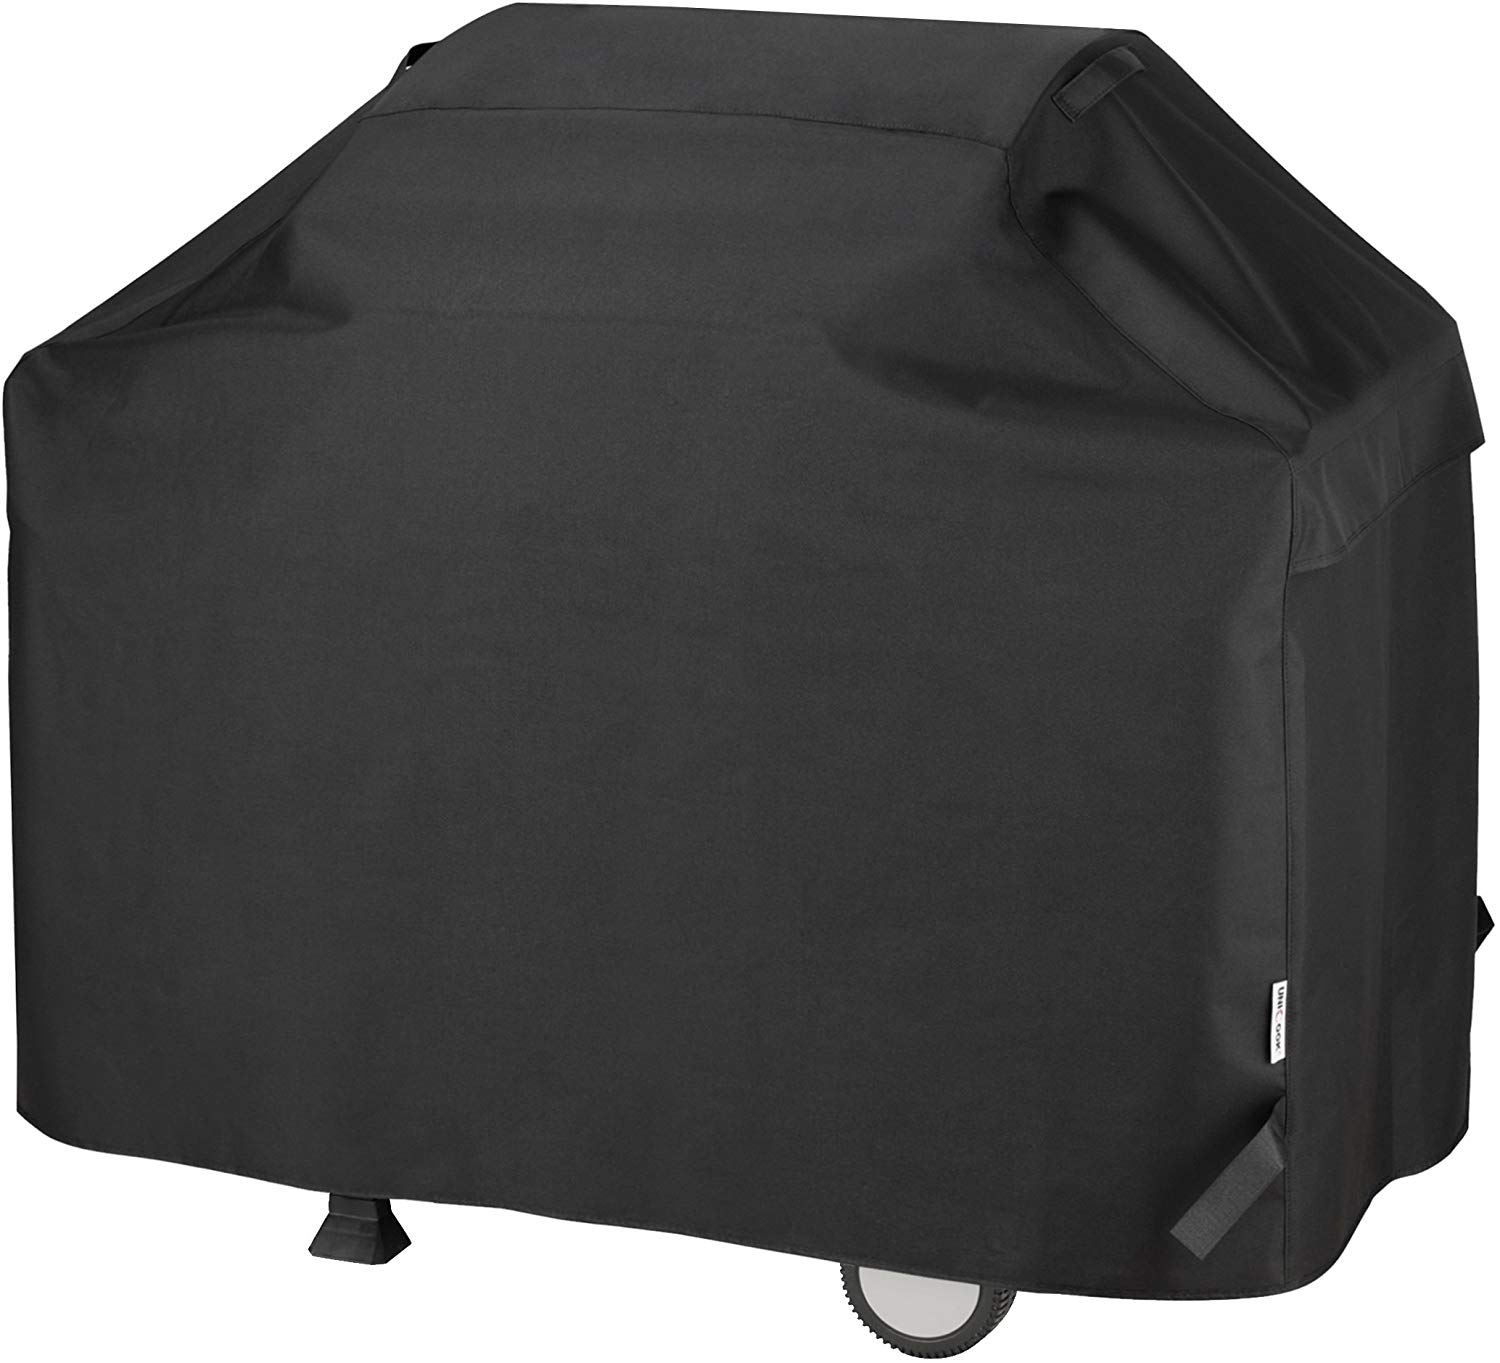 Unicook Heavy Duty Waterproof Barbecue Gas Grill Cover, 55inch BBQ Cover, Special Fade and UV